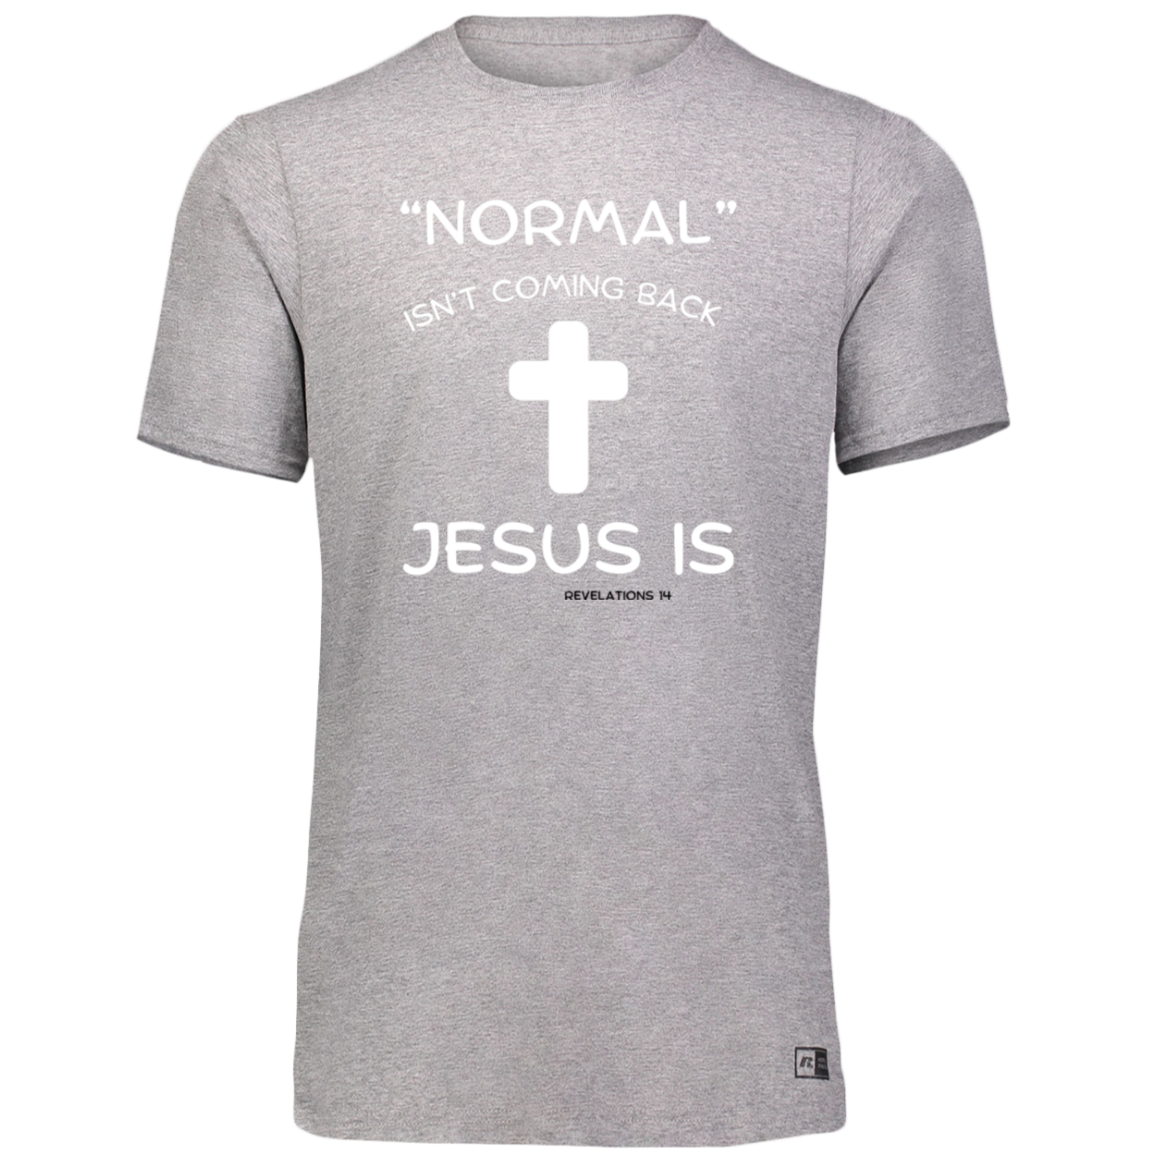 “Normal” Isn’t Coming Back  Essential Dri-Power Tee